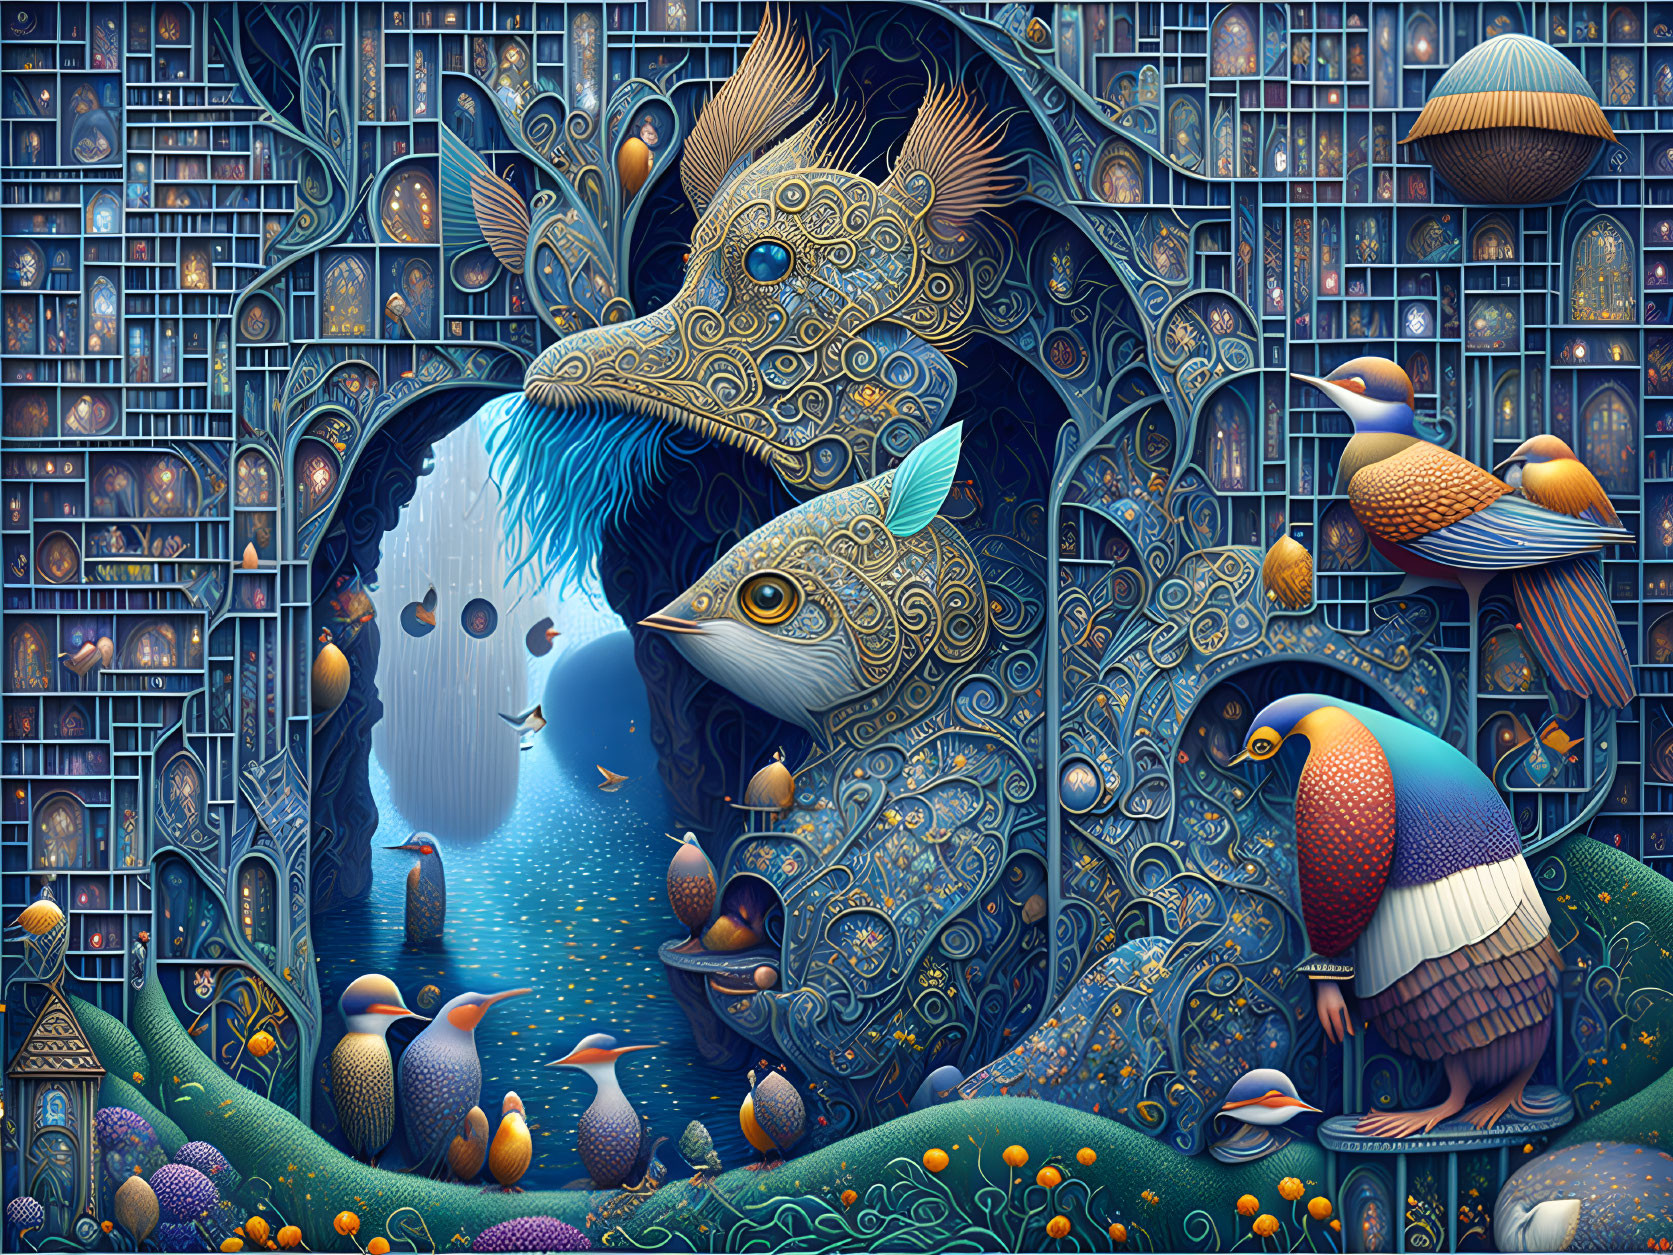 Colorful Artwork: Stylized Animals, Birds, and Library Shelves